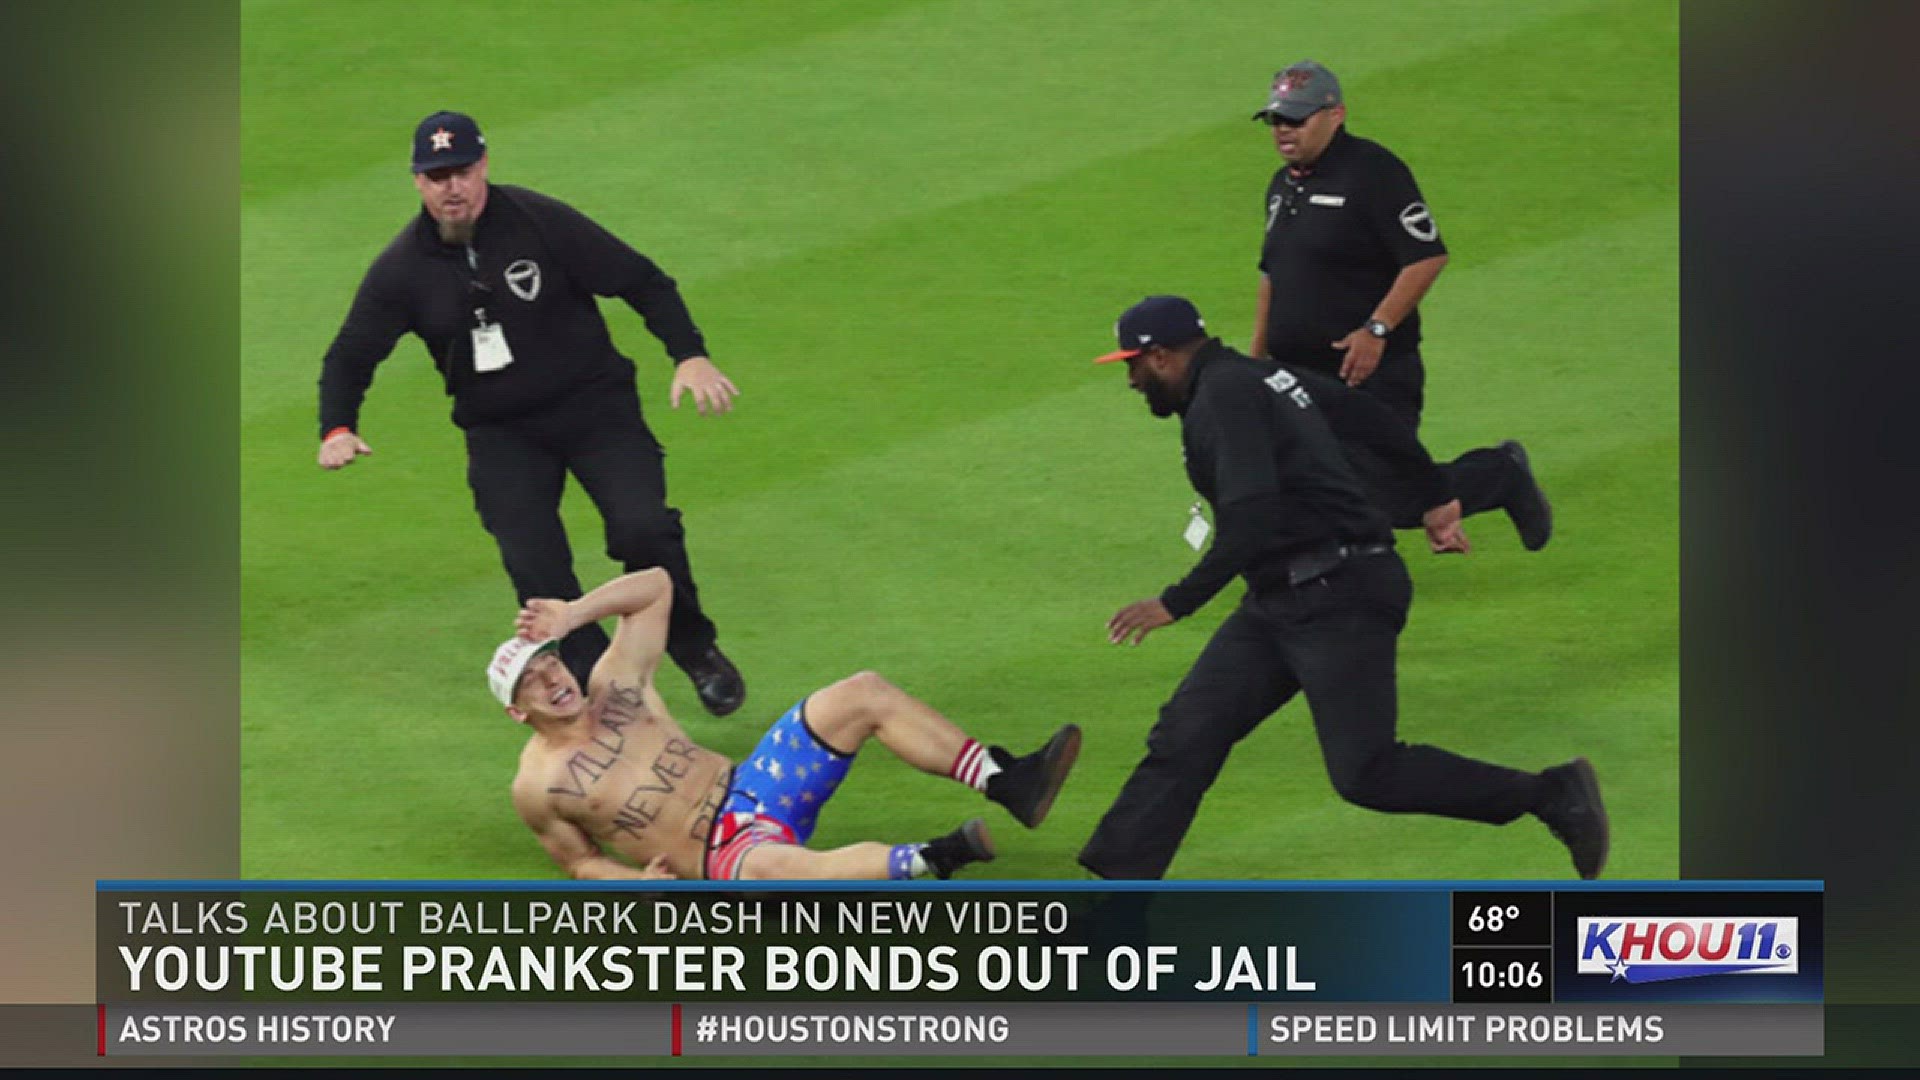 The semi-streaker who ran onto the field at Minute Maid Park Sunday night has been charged with trespassing.